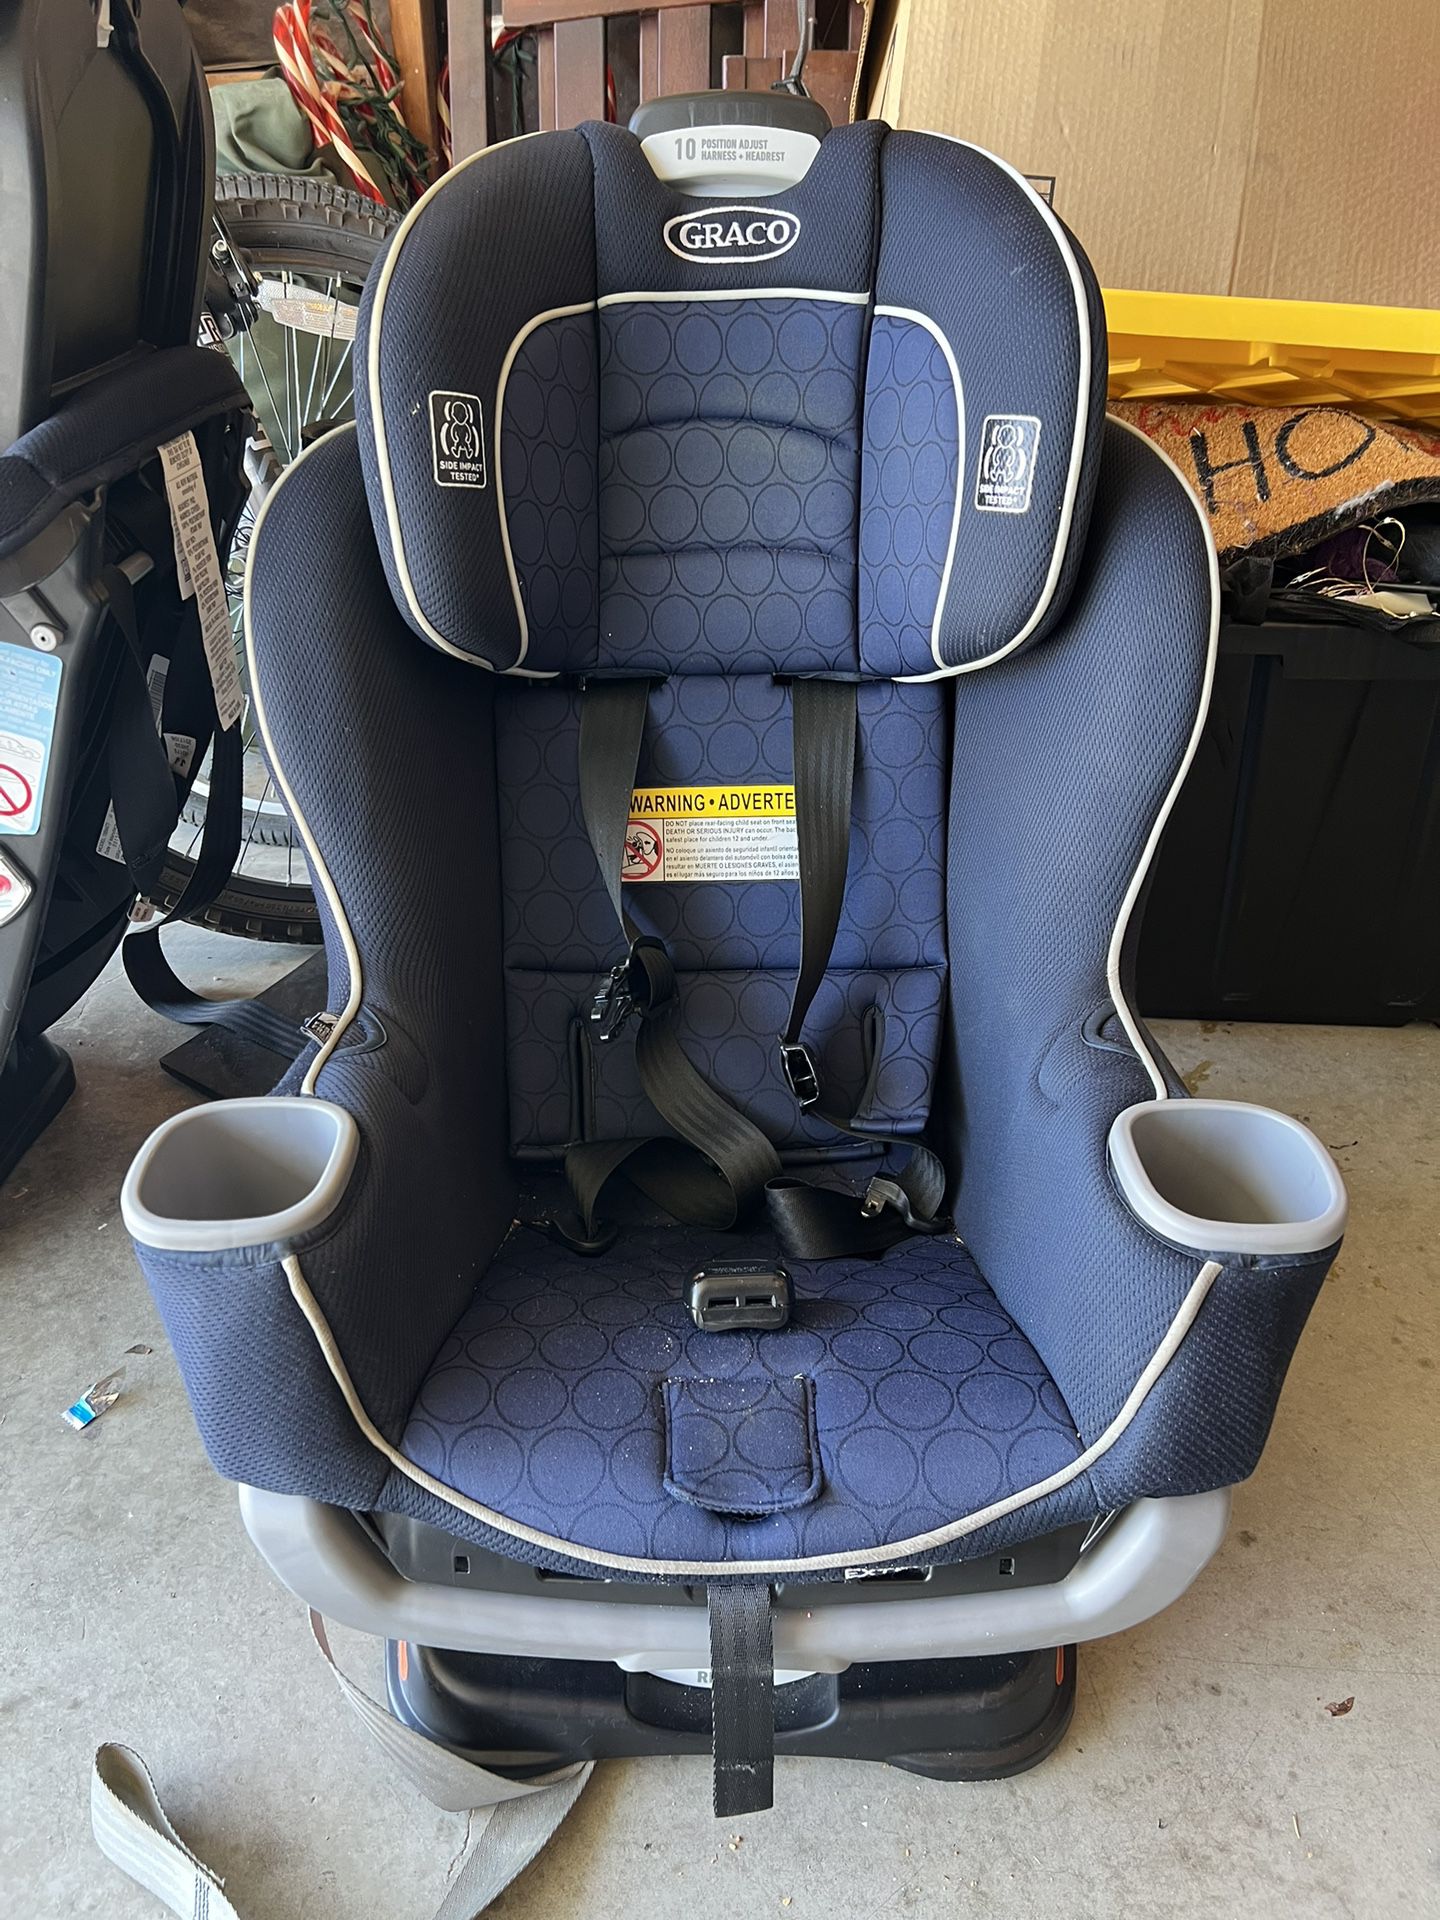 Grecco extend To Fit Baby/toddler Car seat 